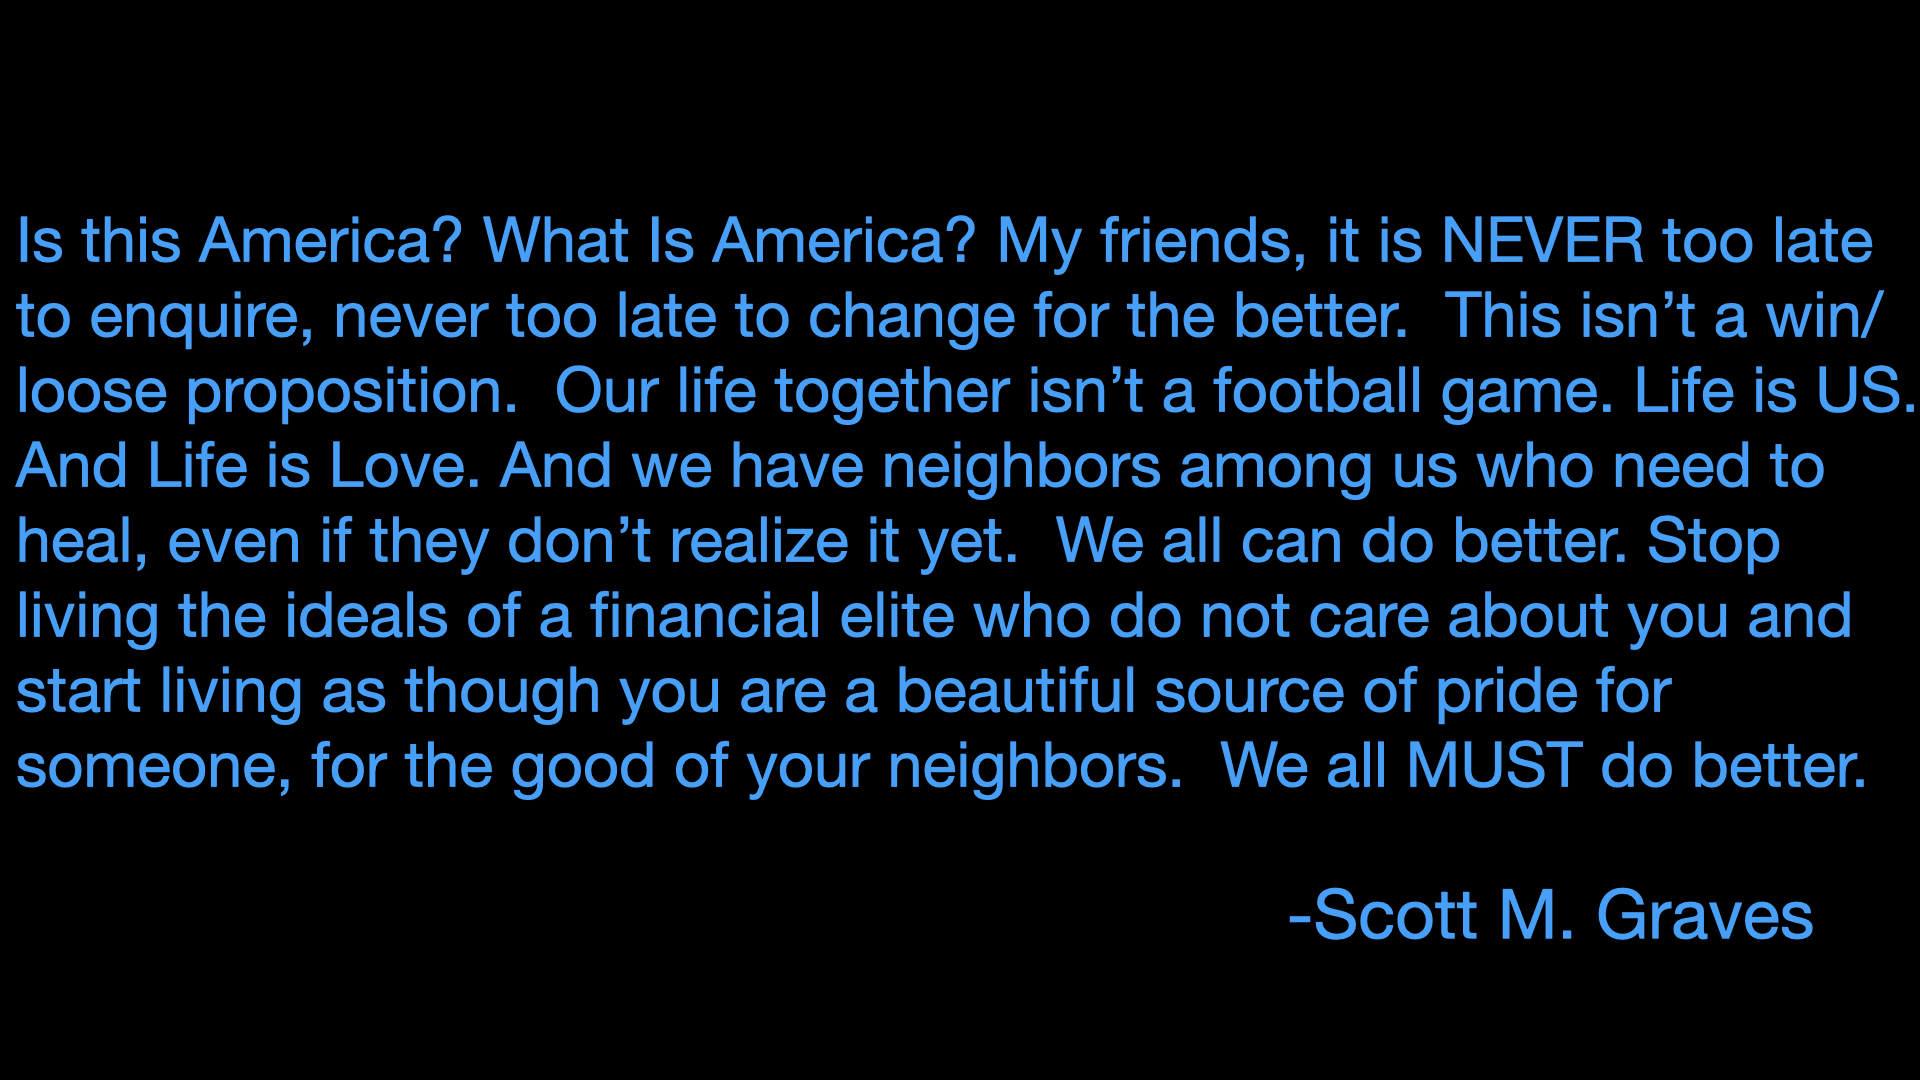 Quote regarding the events of January 6, 2021 from our co-host Scott M. Graves